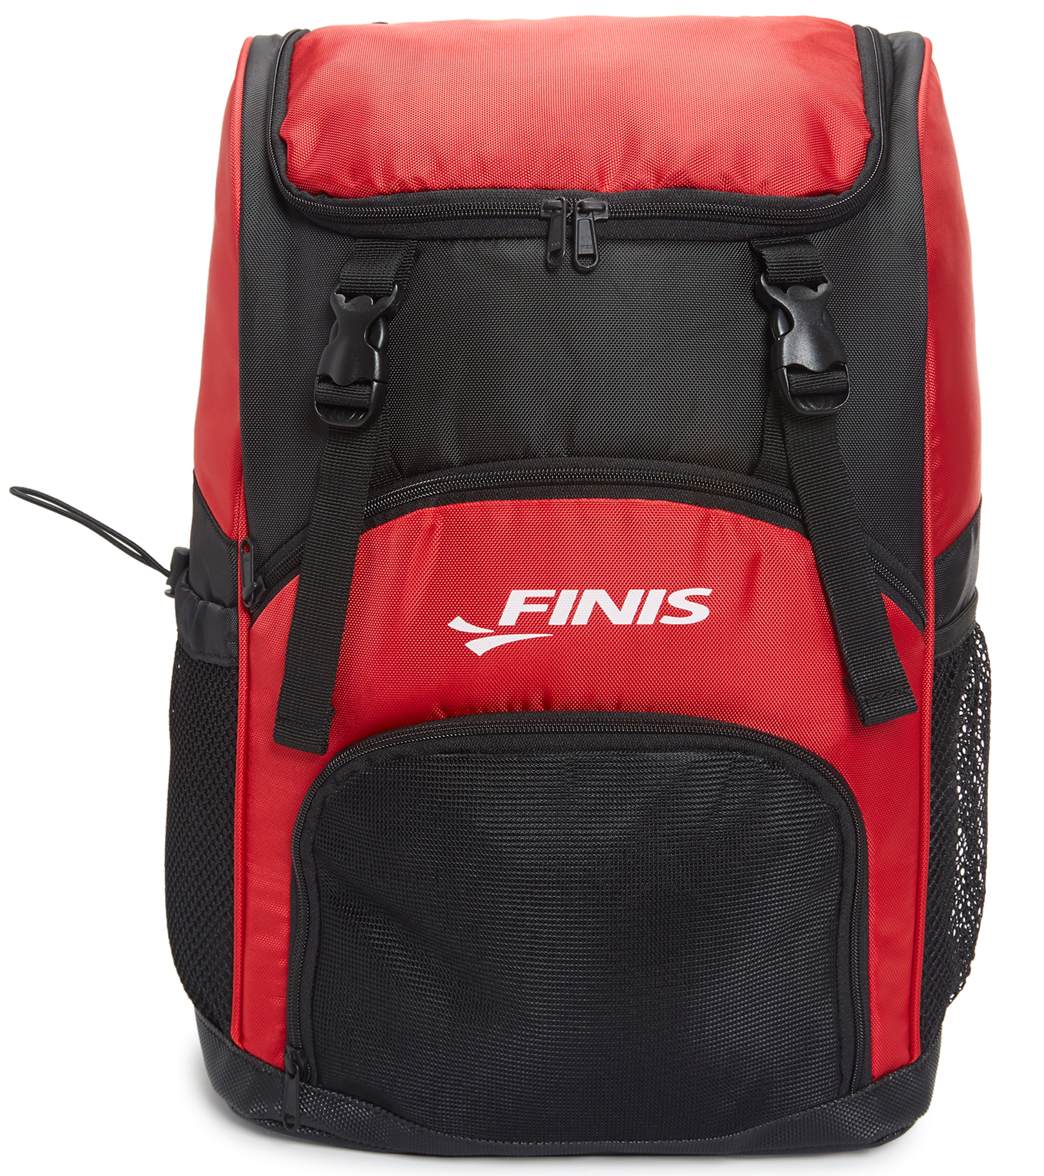 Finis Team Backpack - Red - Swimoutlet.com